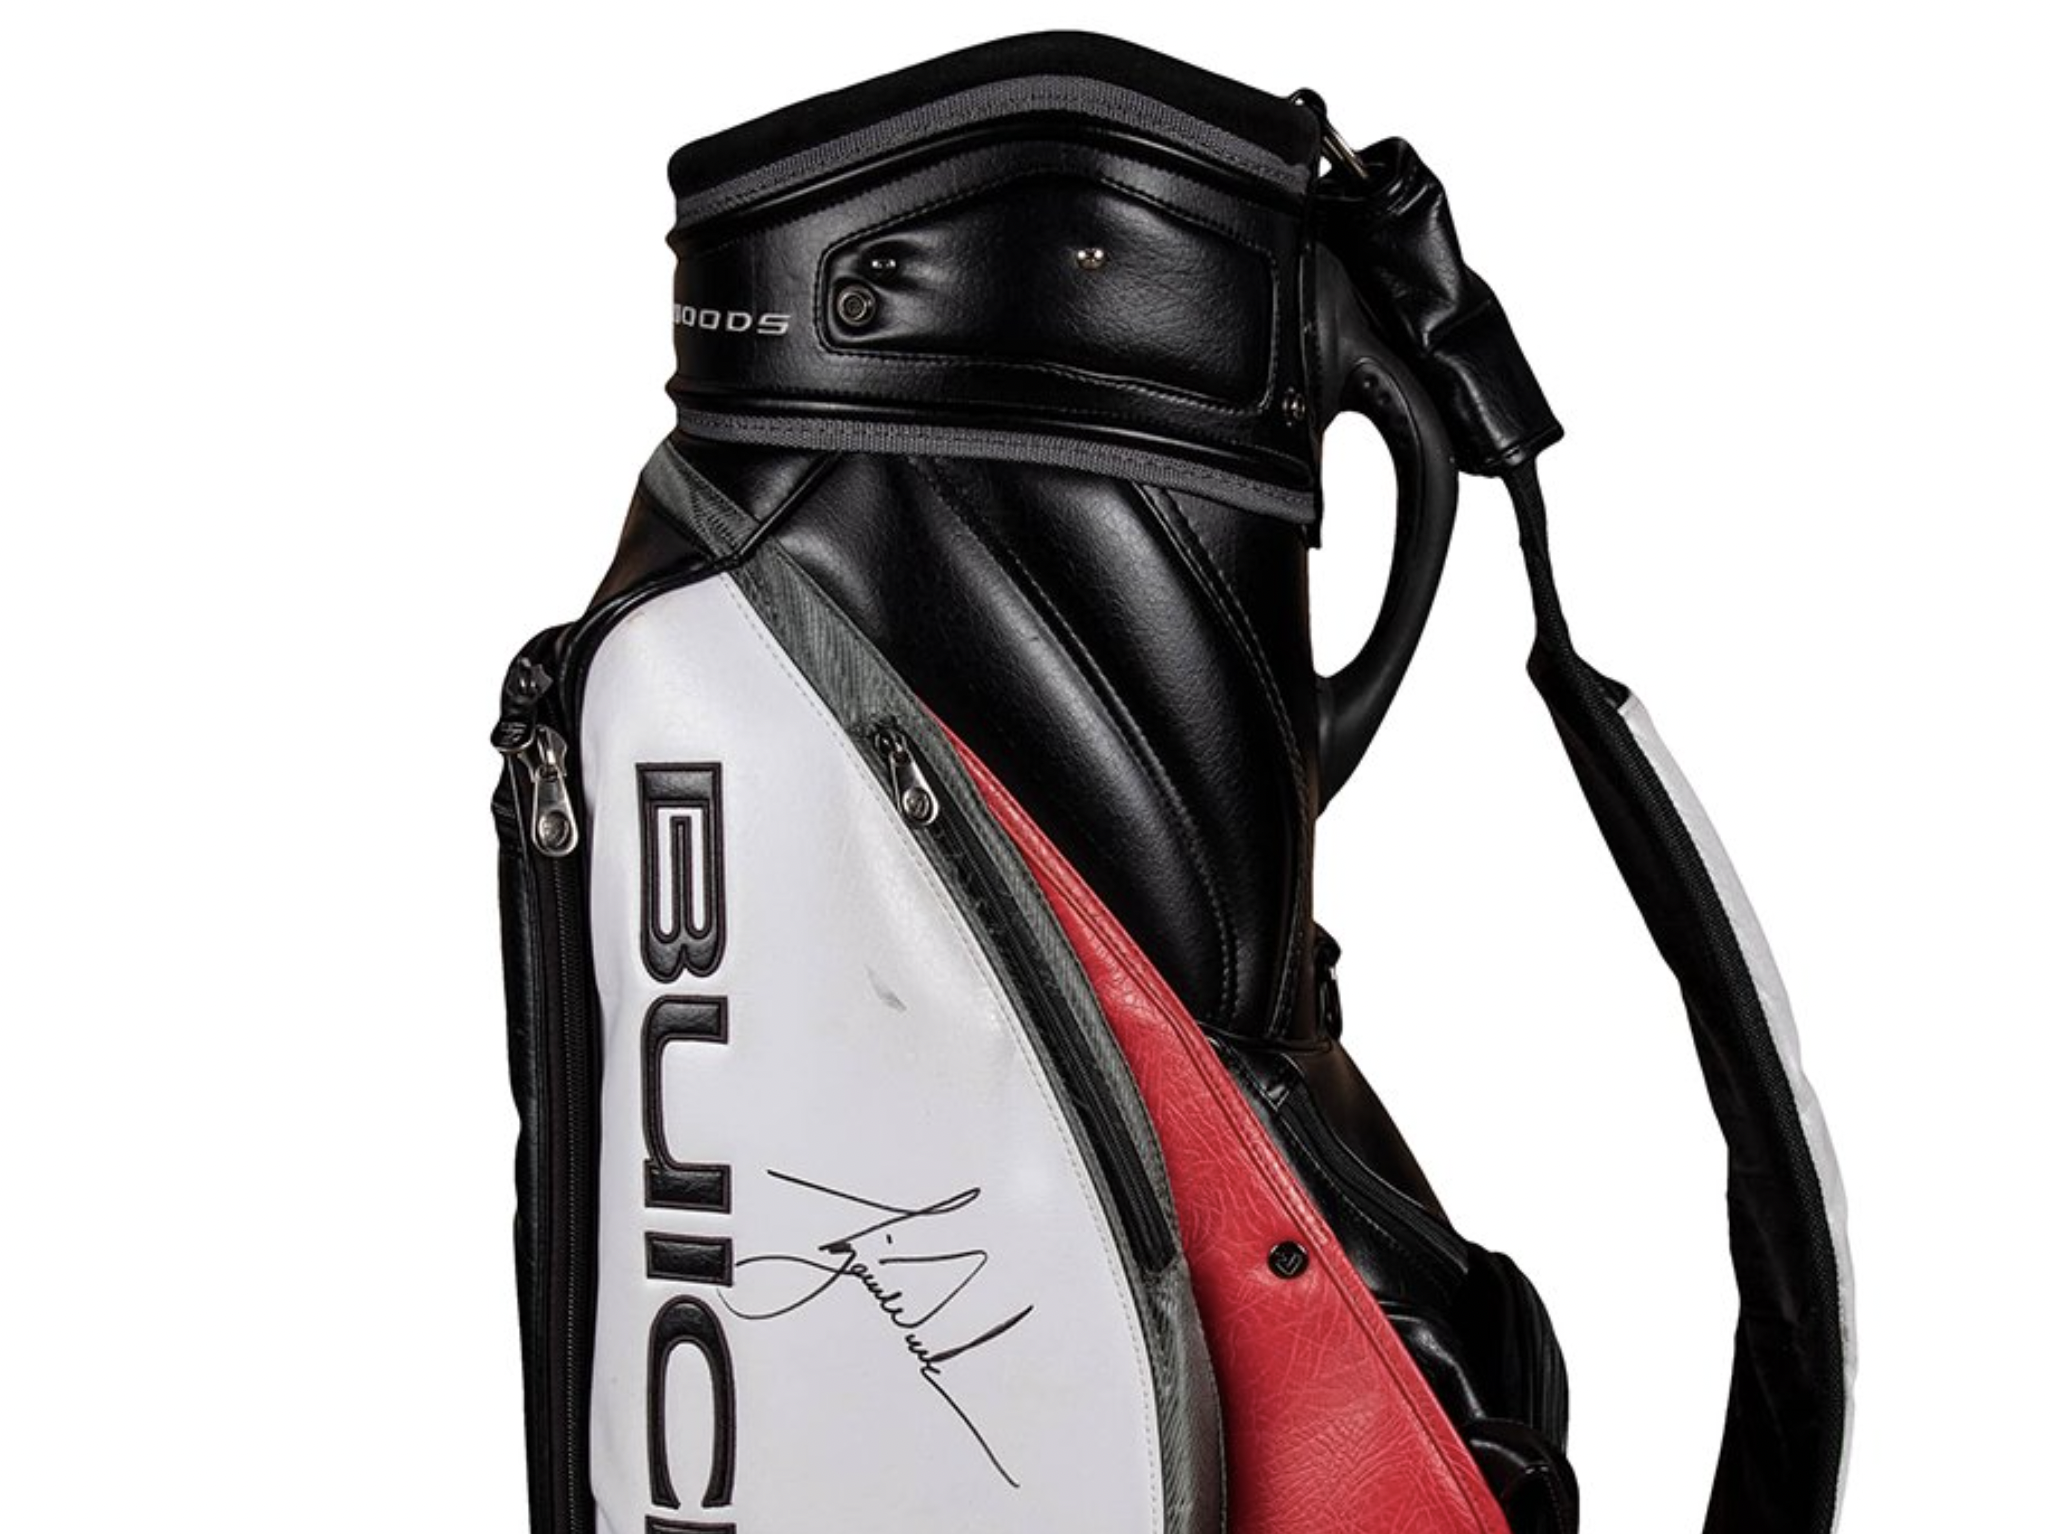 Tiger Woods 2005 tournament-used and signed Nike golf bag sells for record  price – GolfWRX